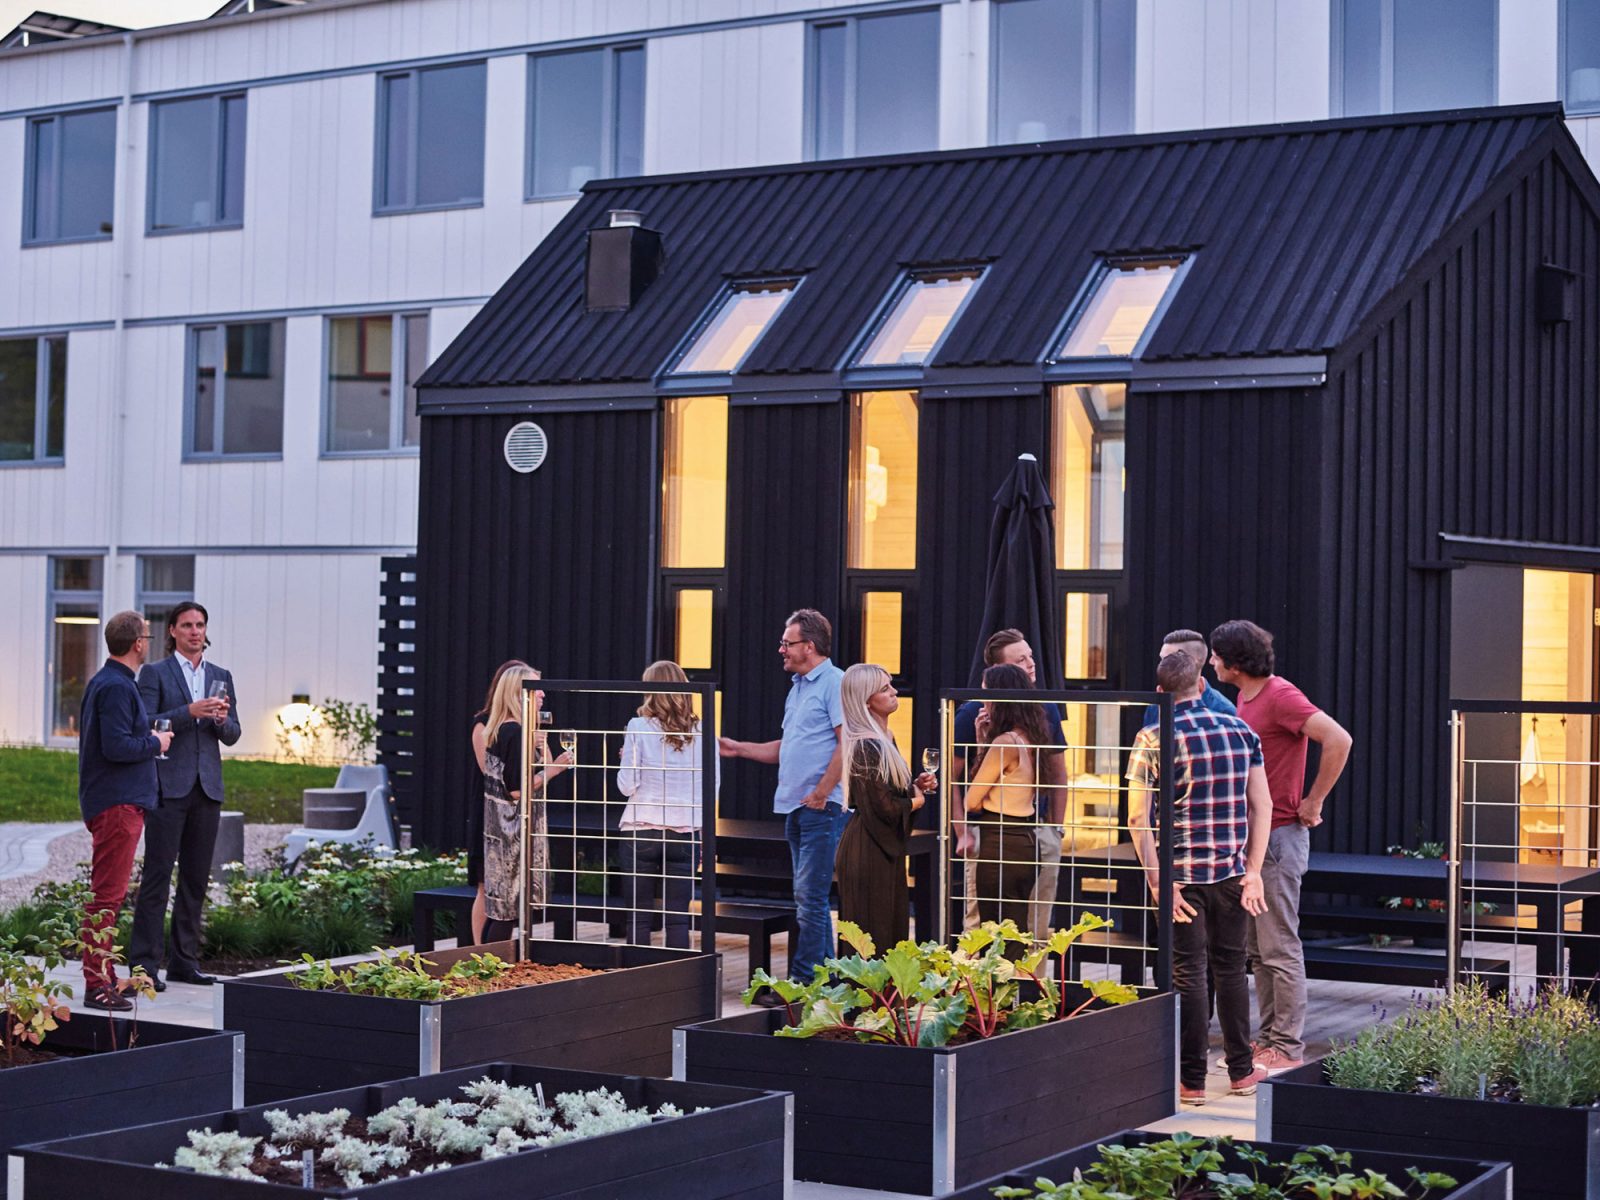 Casually dressed people mingling by a small black house, in the foreground you can see pallets with plants.